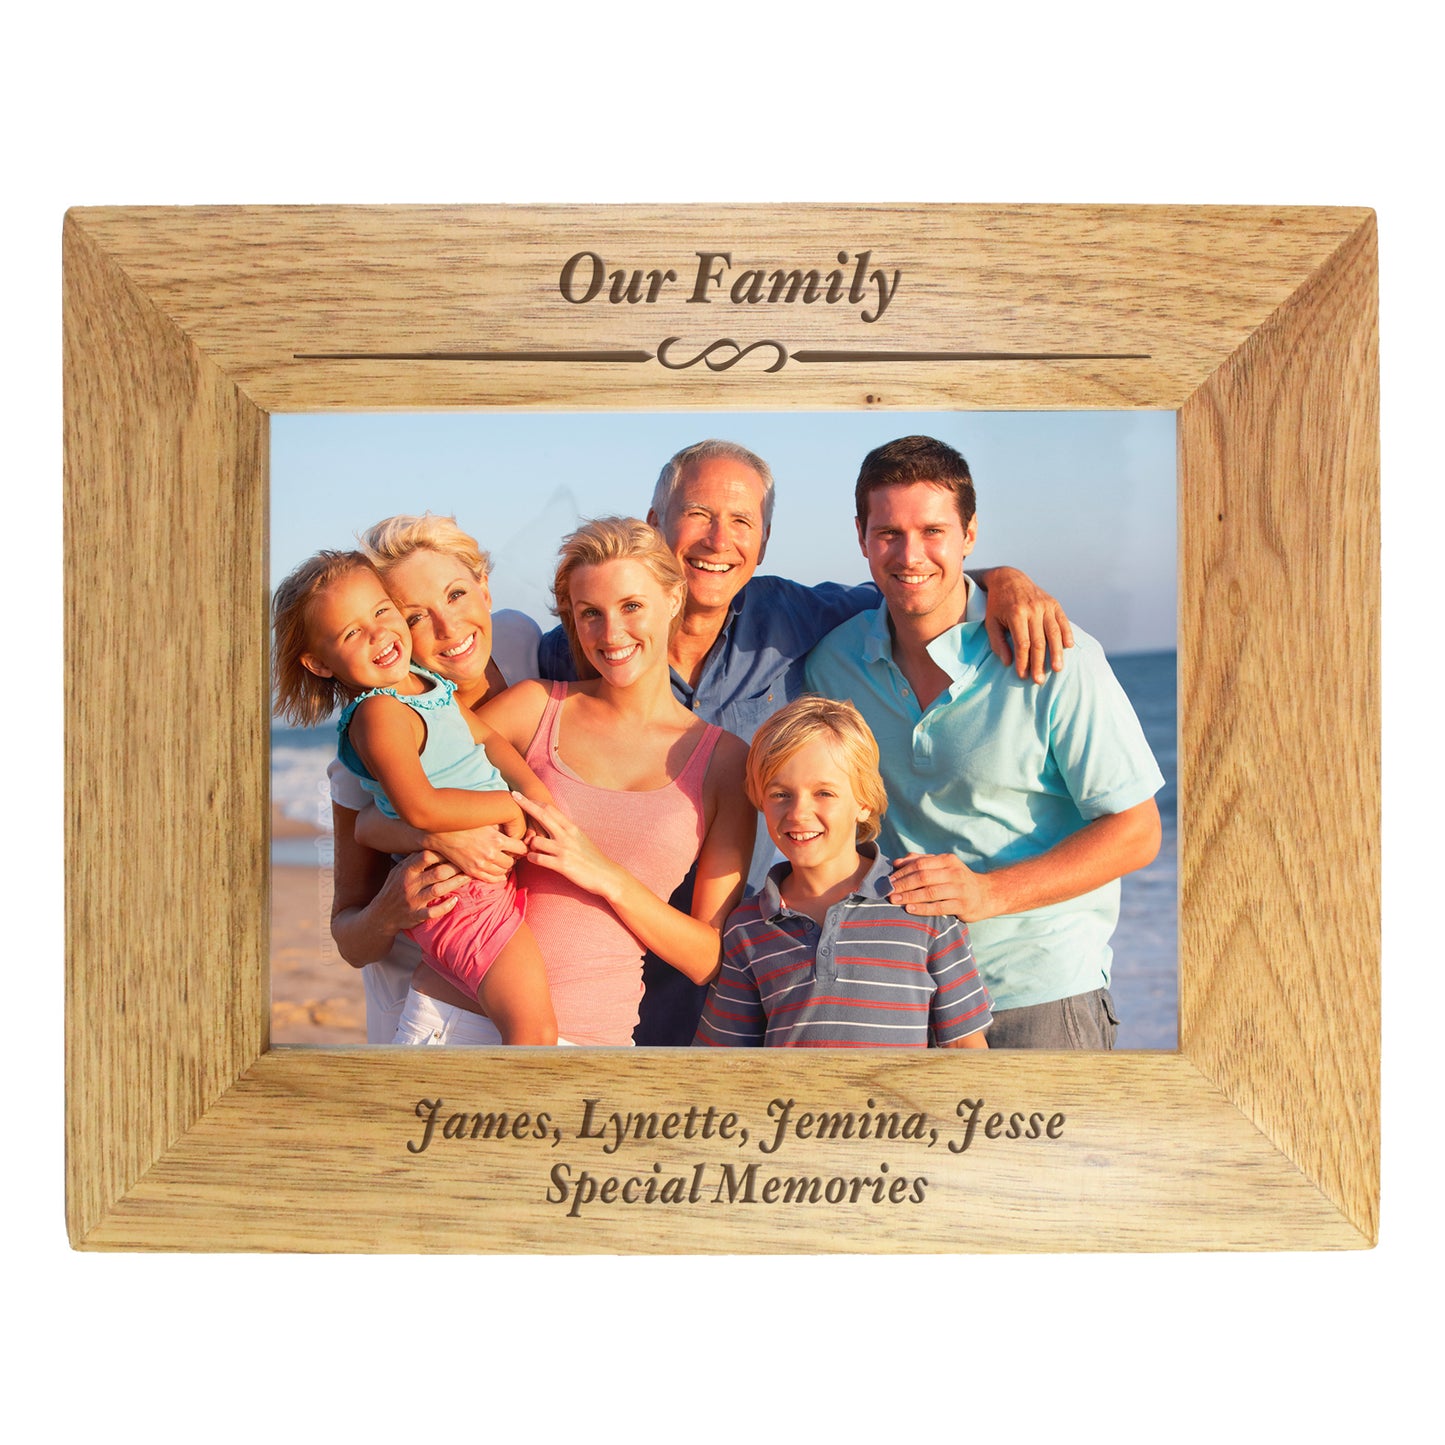 Personalised Formal 7x5 Landscape Wooden Photo Frame - Personalise It!